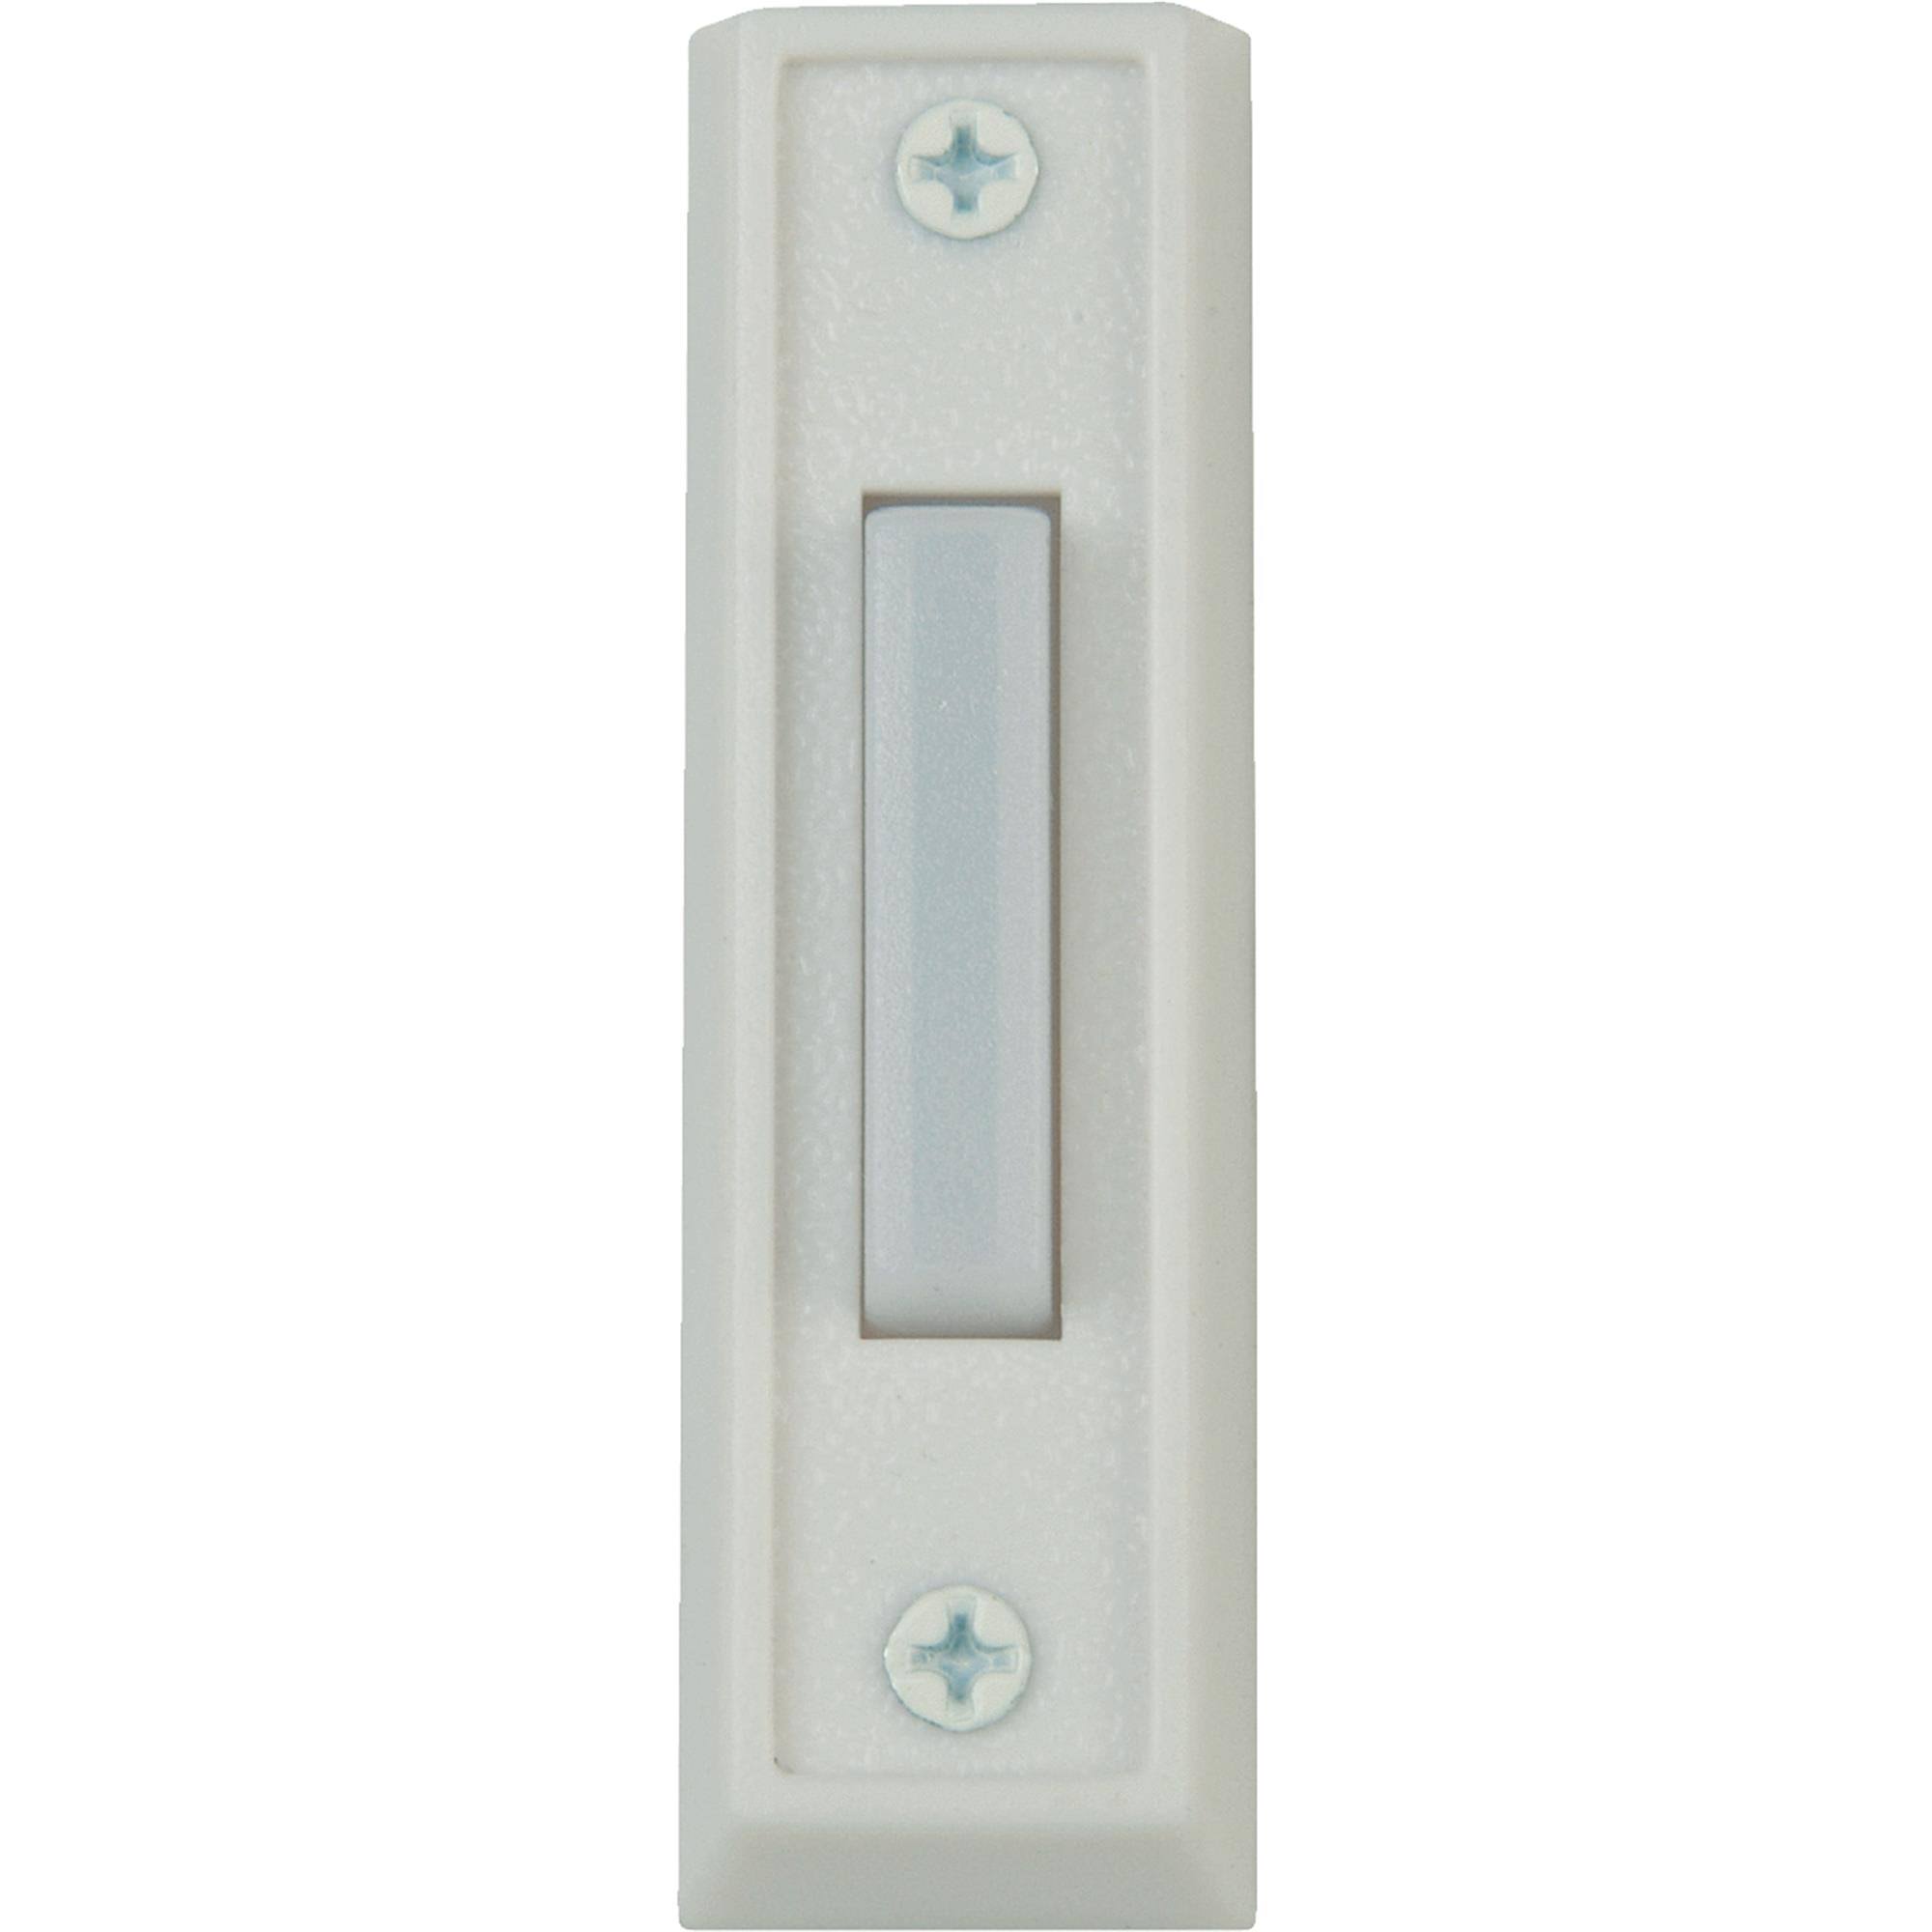 Iq America Wired Lighted Doorbell Push Button - White